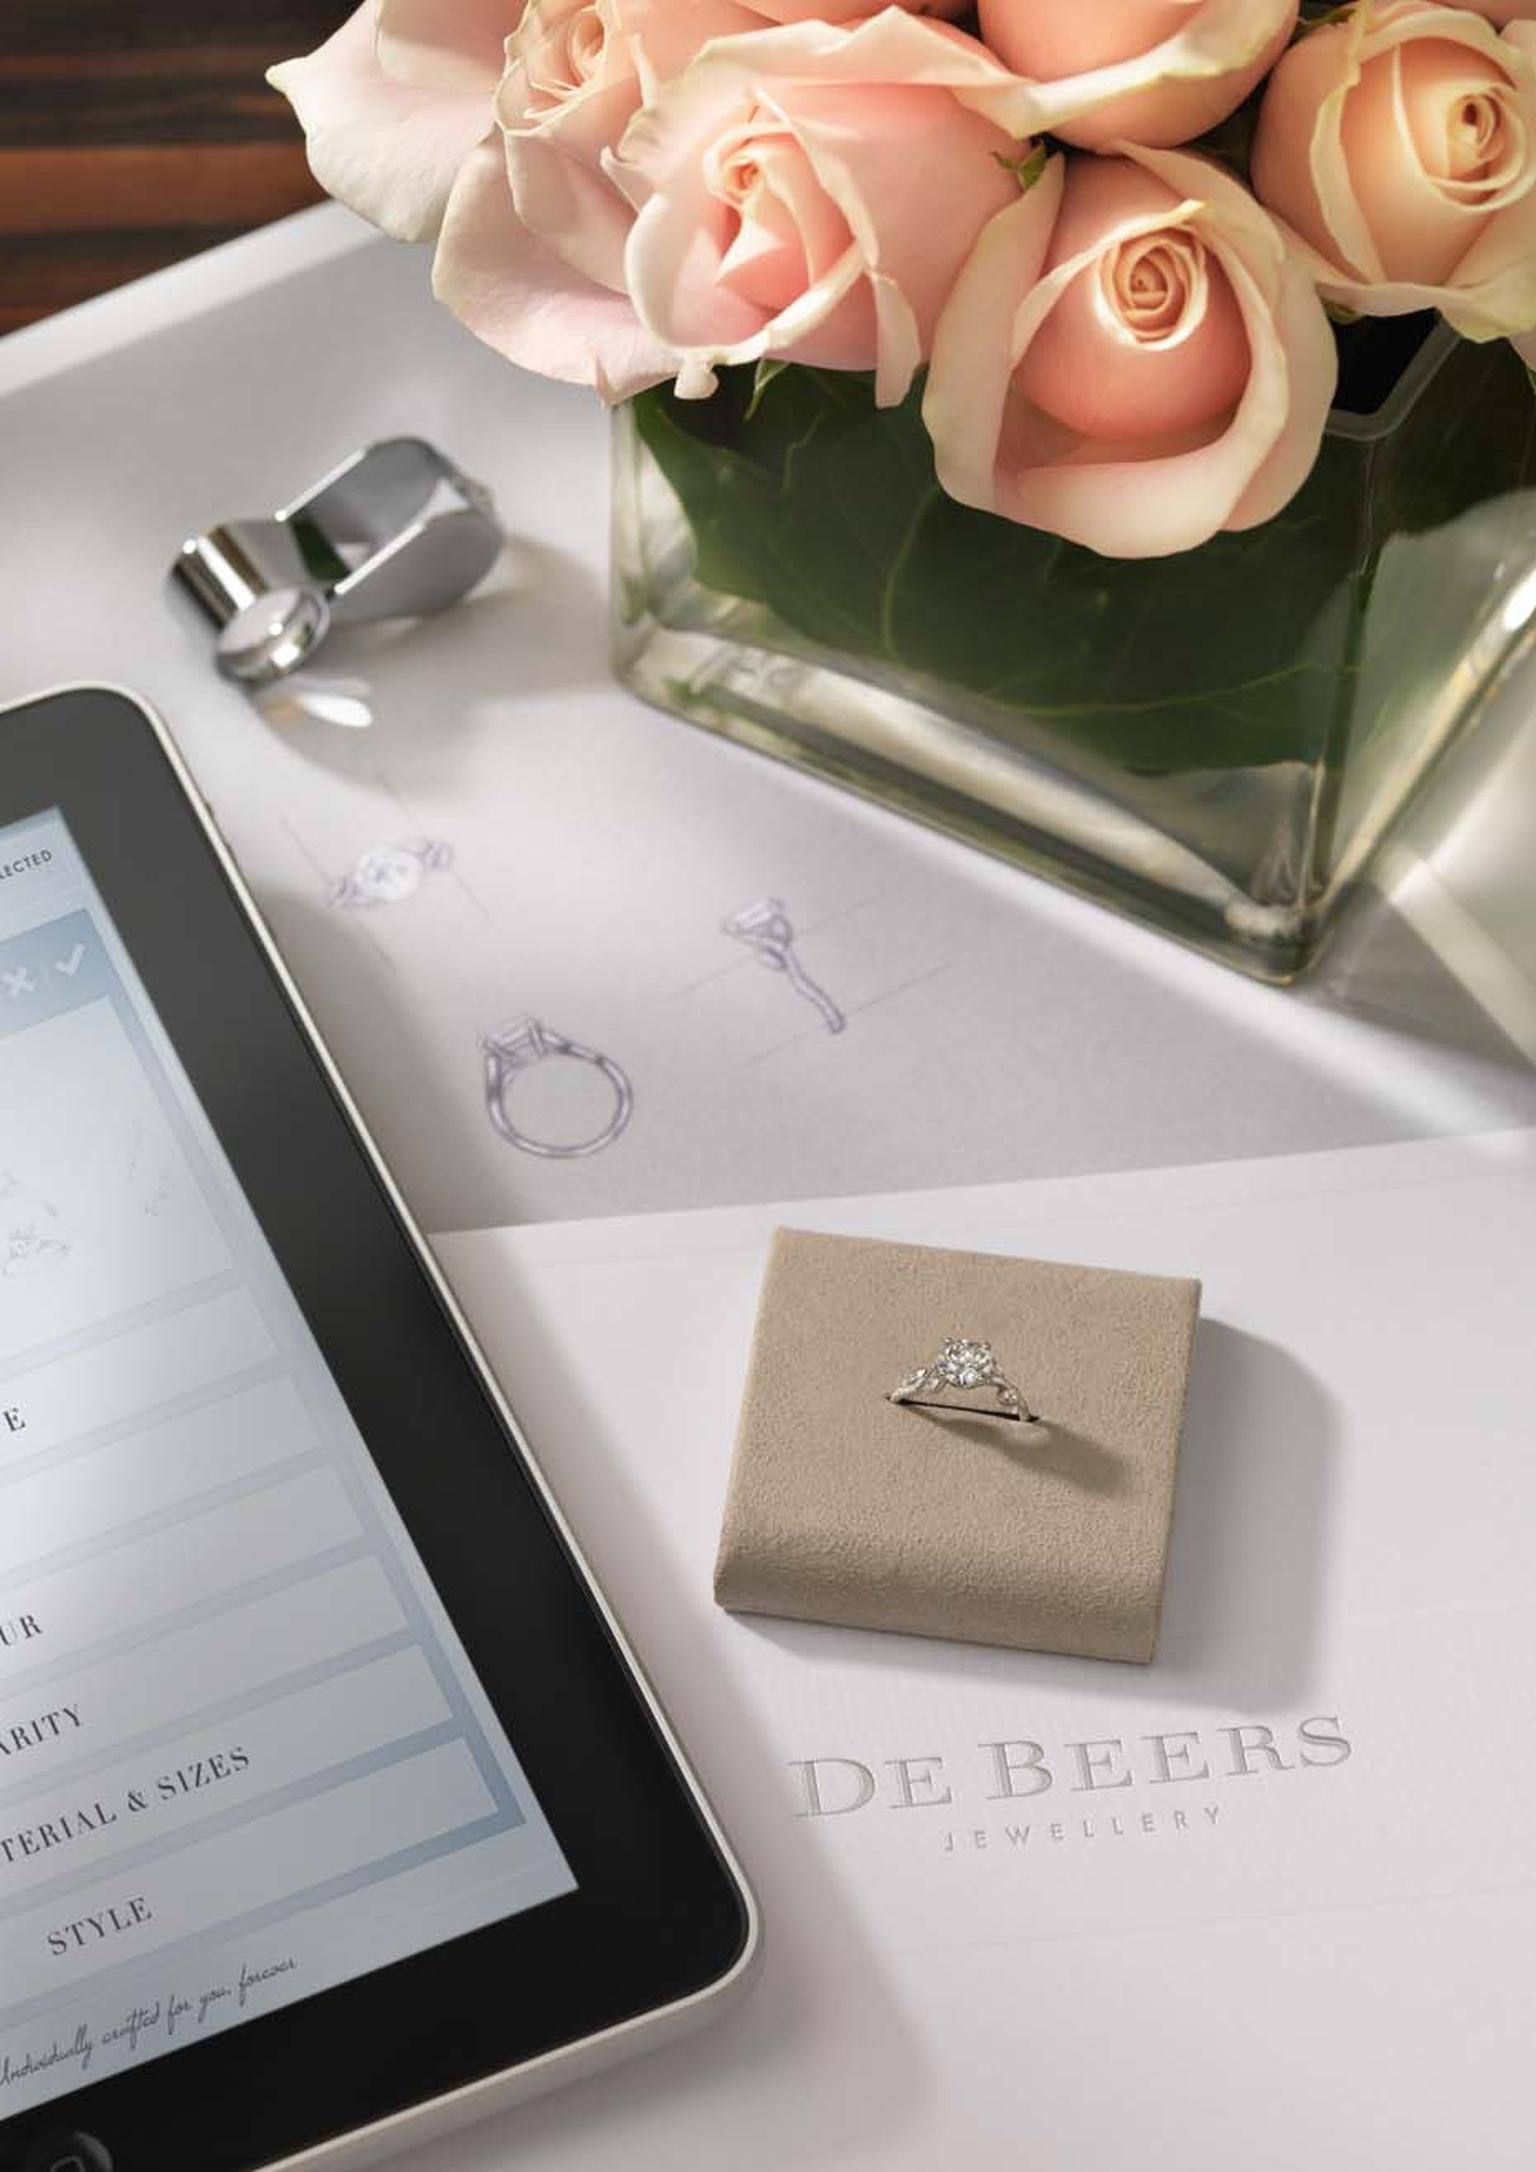 De Beers recently launched an in-store iPad app as part of its "For You, Forever" bespoke engagement ring service, which customers can have fun playing with when they visit a De Beers boutique.